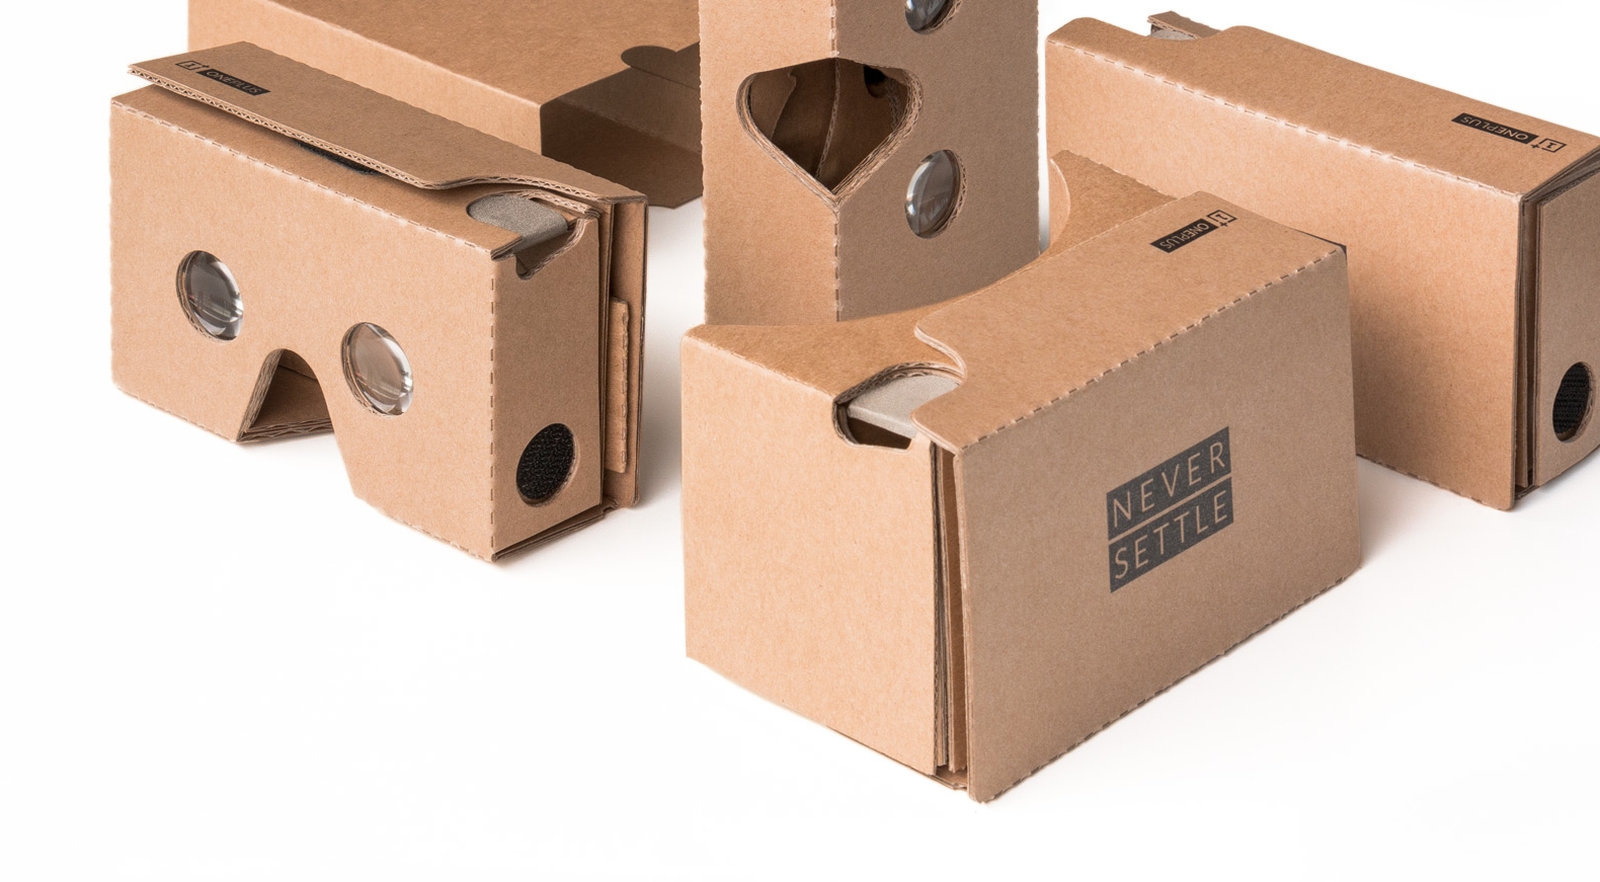 OnePlus 2 launch VR